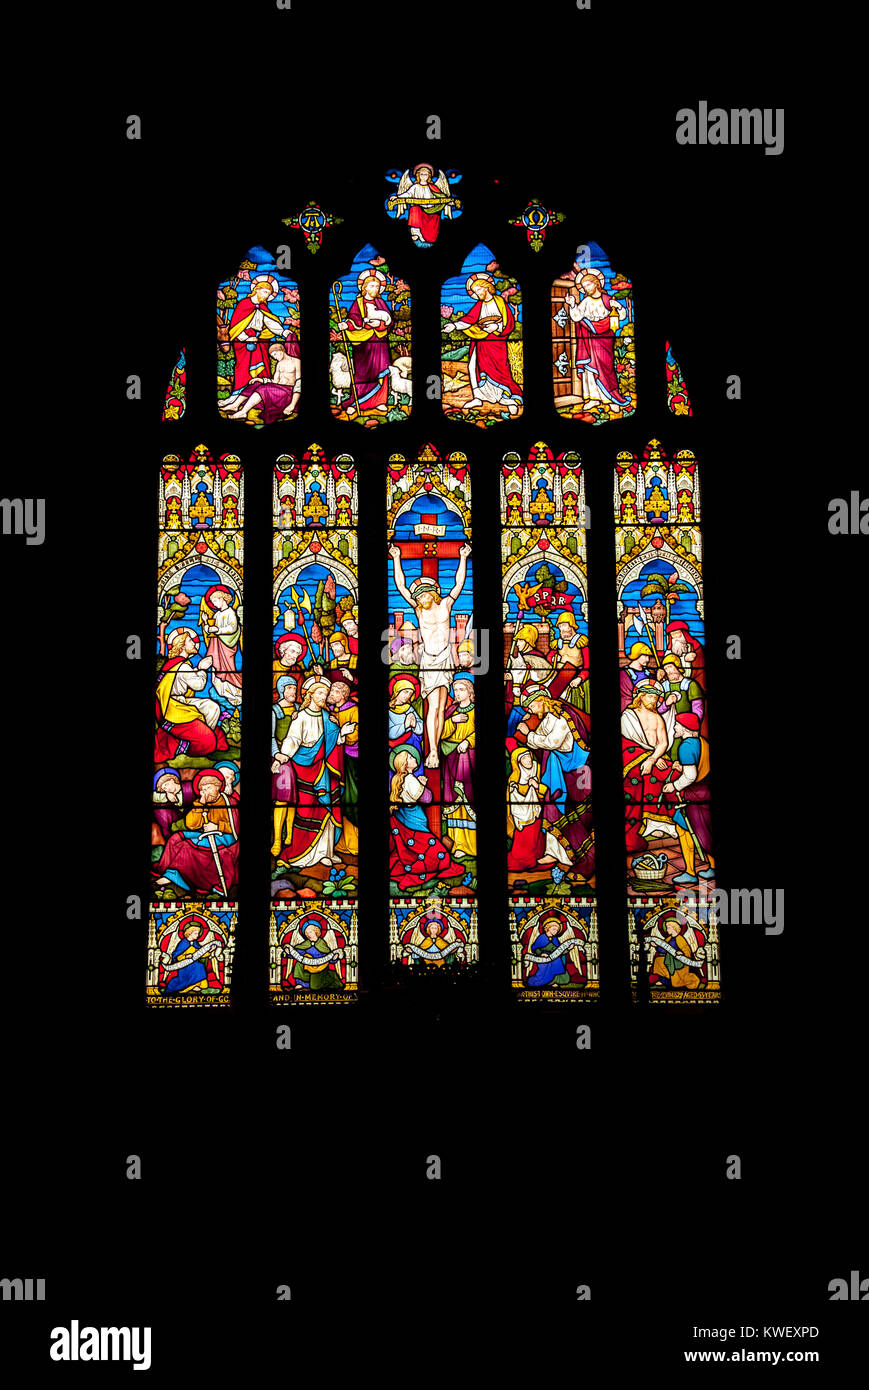 Stained Glass windows from the interior of St Peter's church Carmarthen, Wales, UK. The East Window. Stock Photo